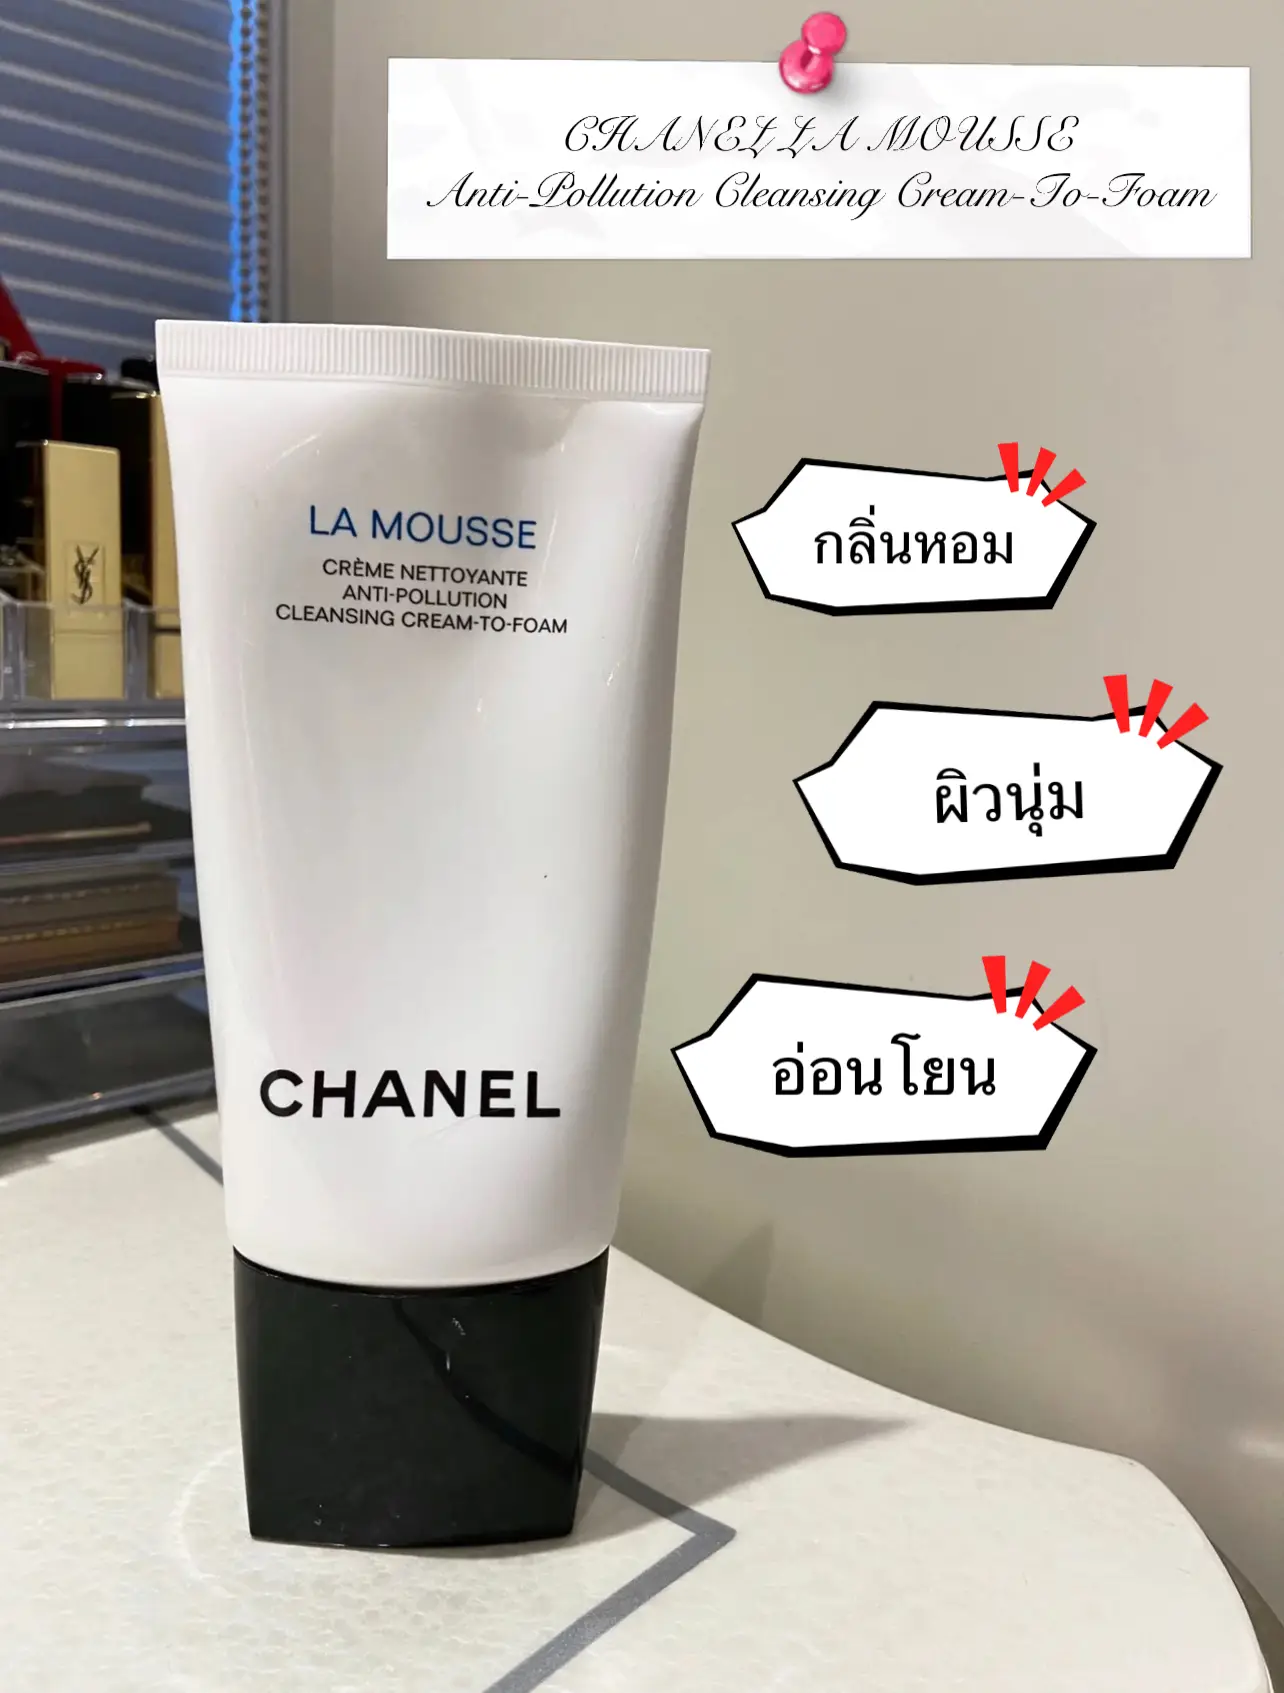 chanel la mousse anti pollution cleansing cream to foam reviews